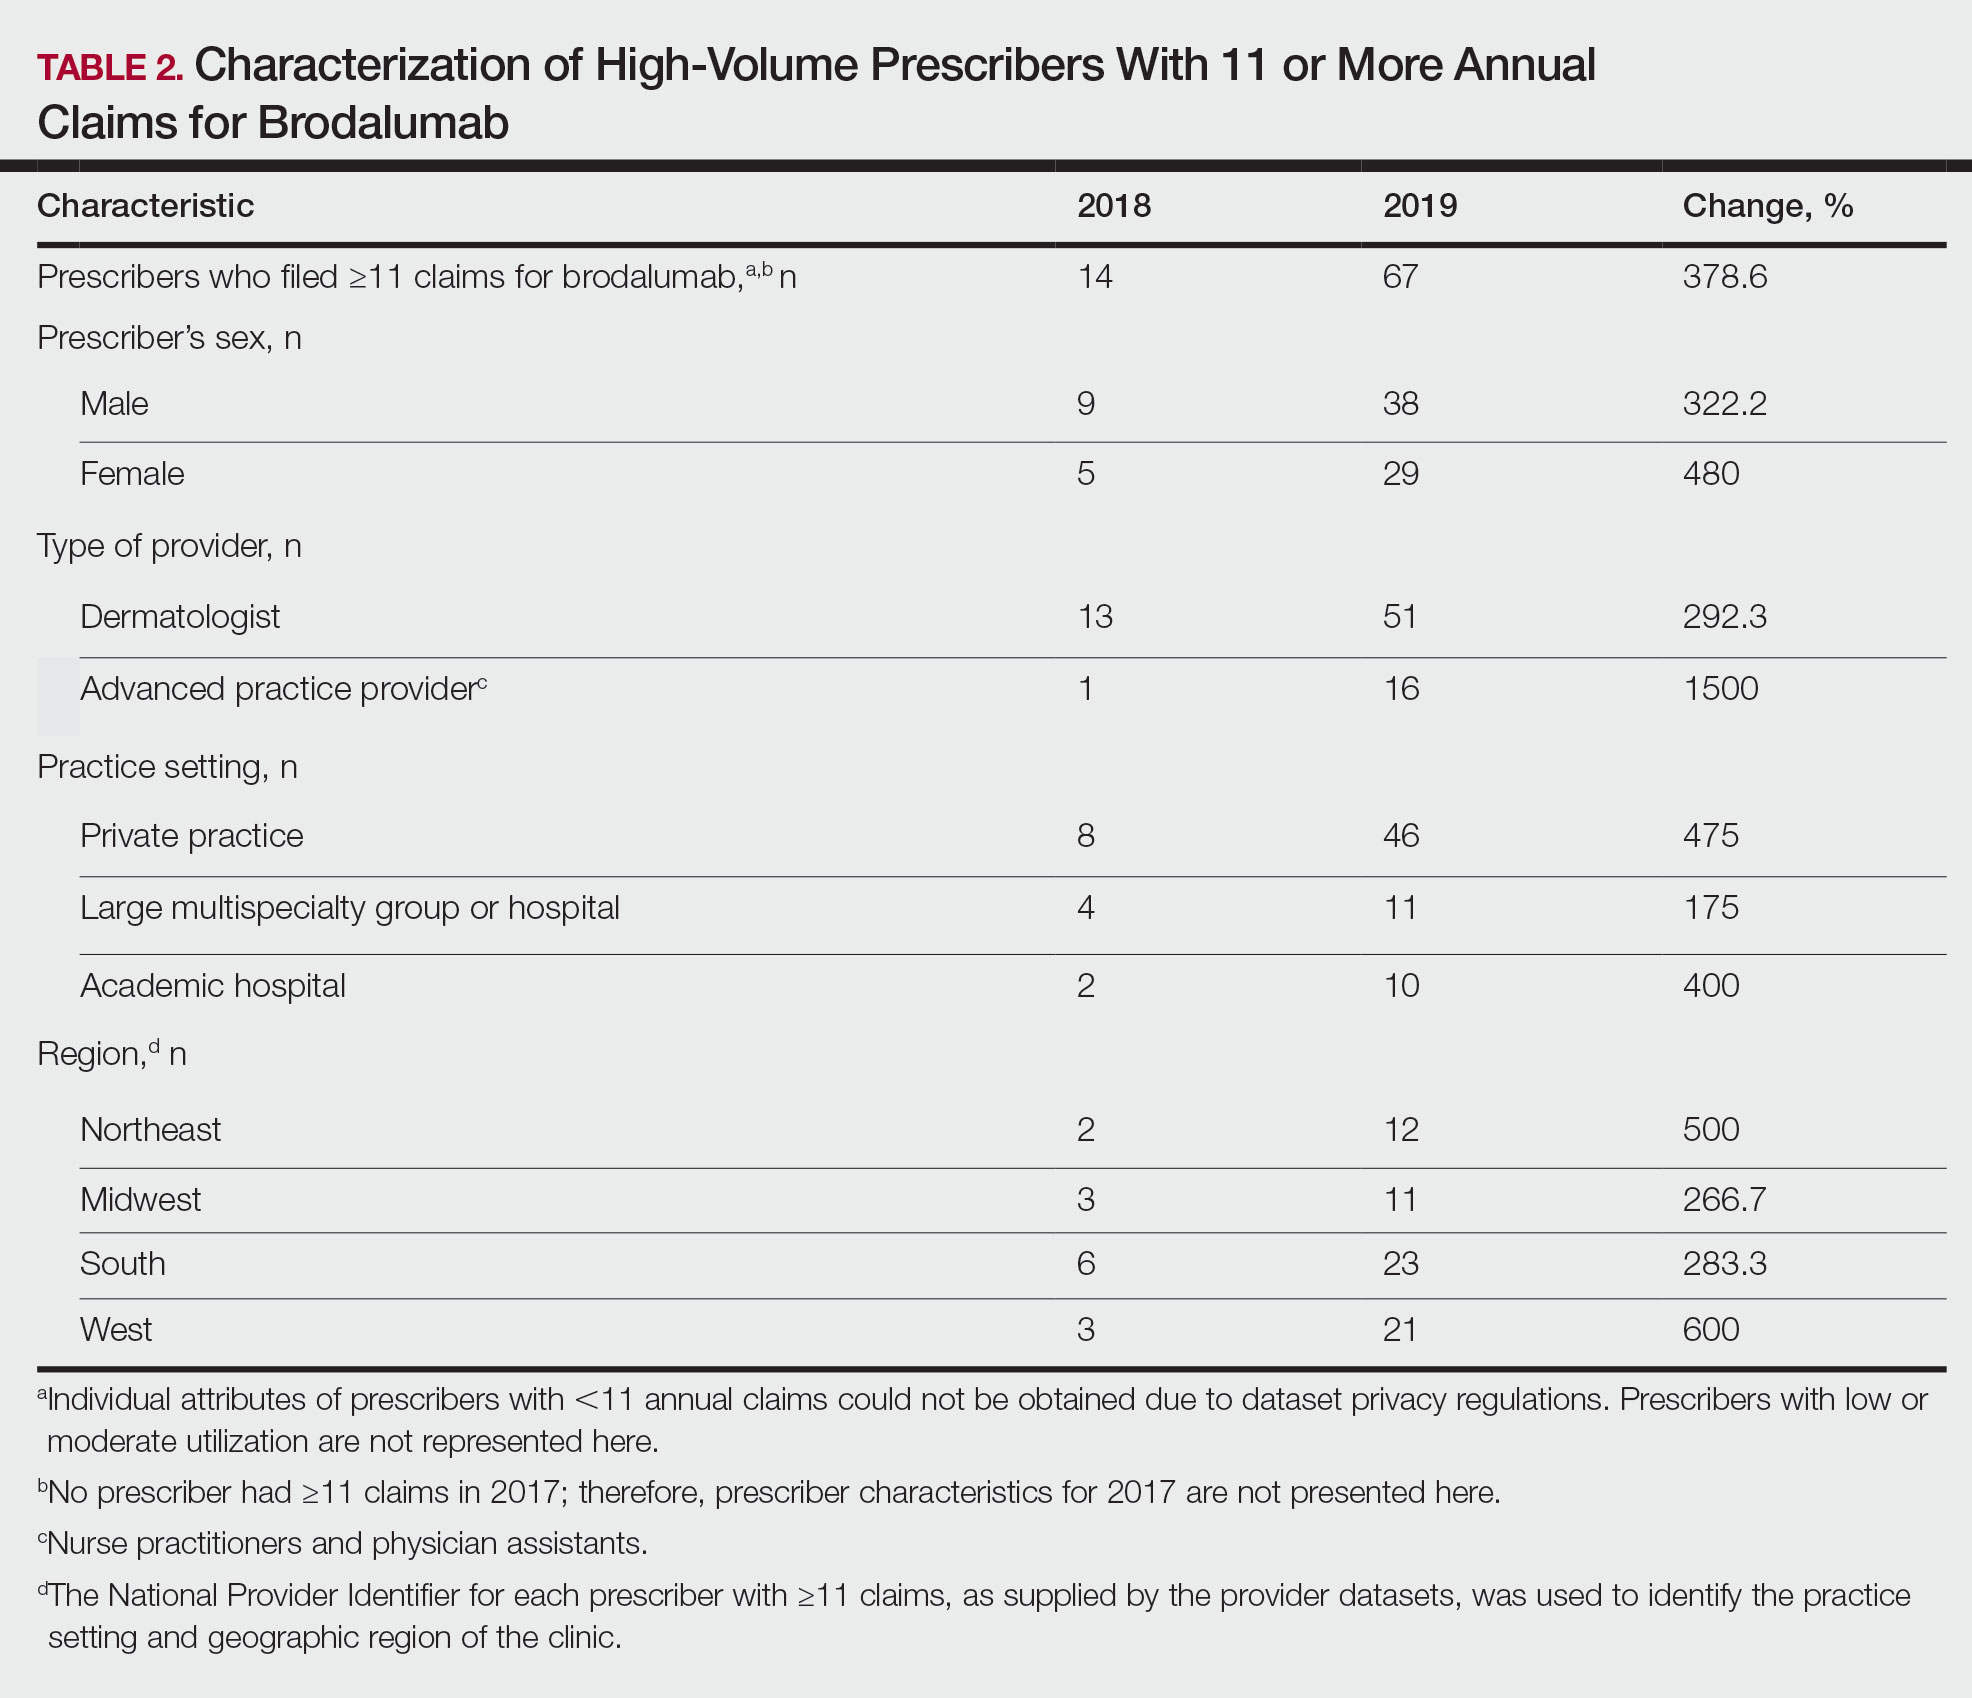 Characterization of High-Volume Prescribers With 11 or More Annual Claims for Brodalumab